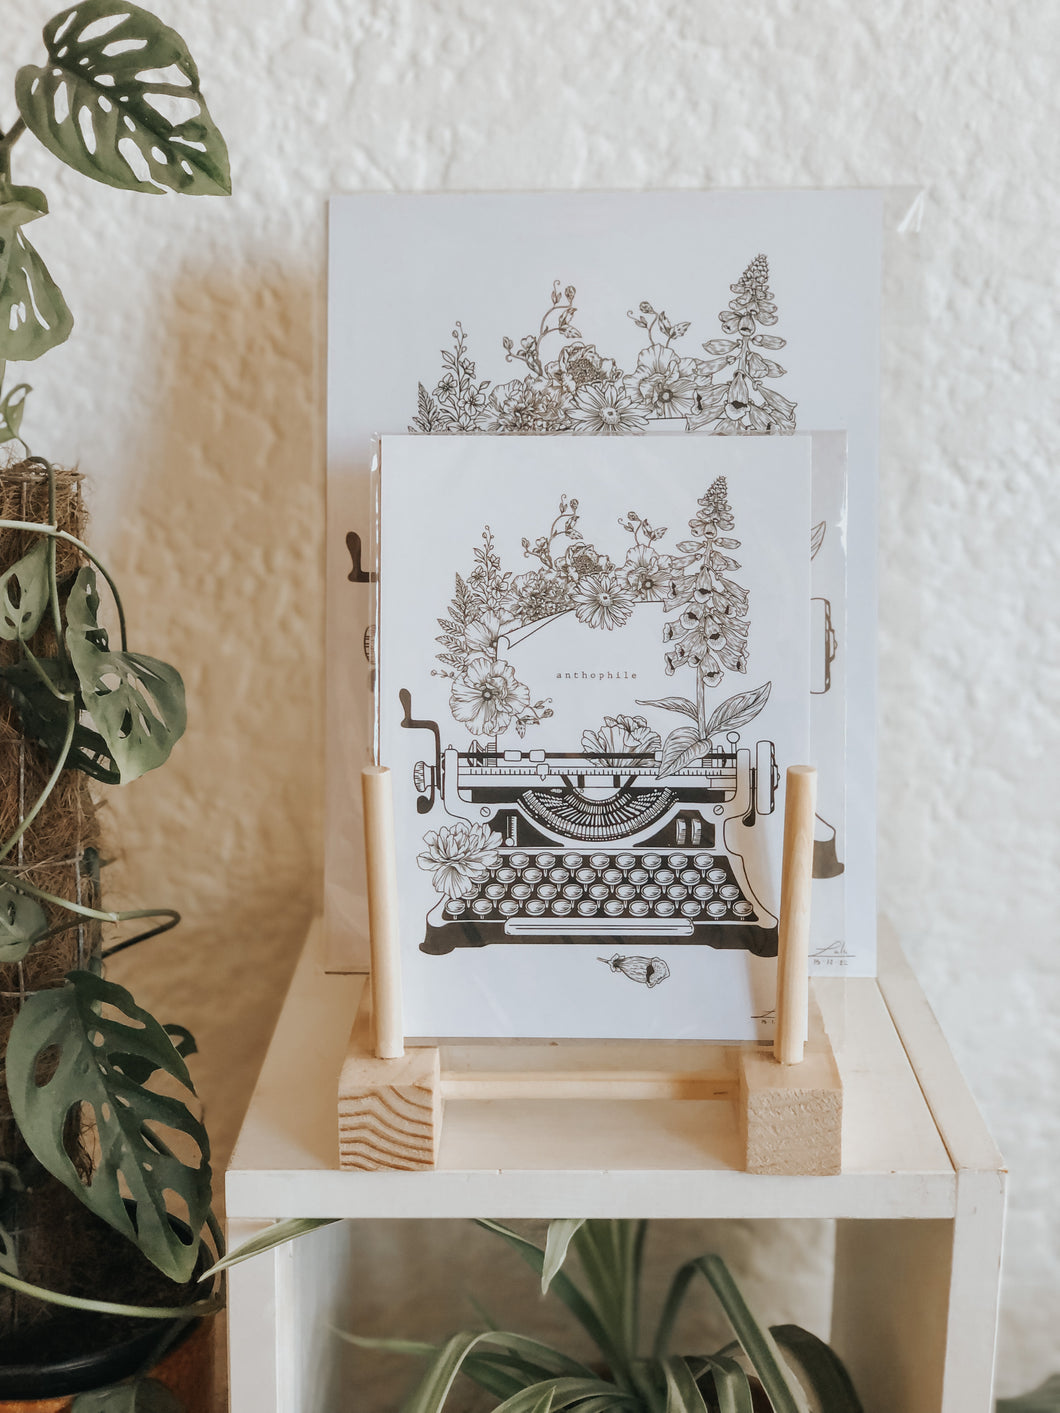 Black and white illustration of a typewriter surrounded with botanicals. The message reads 